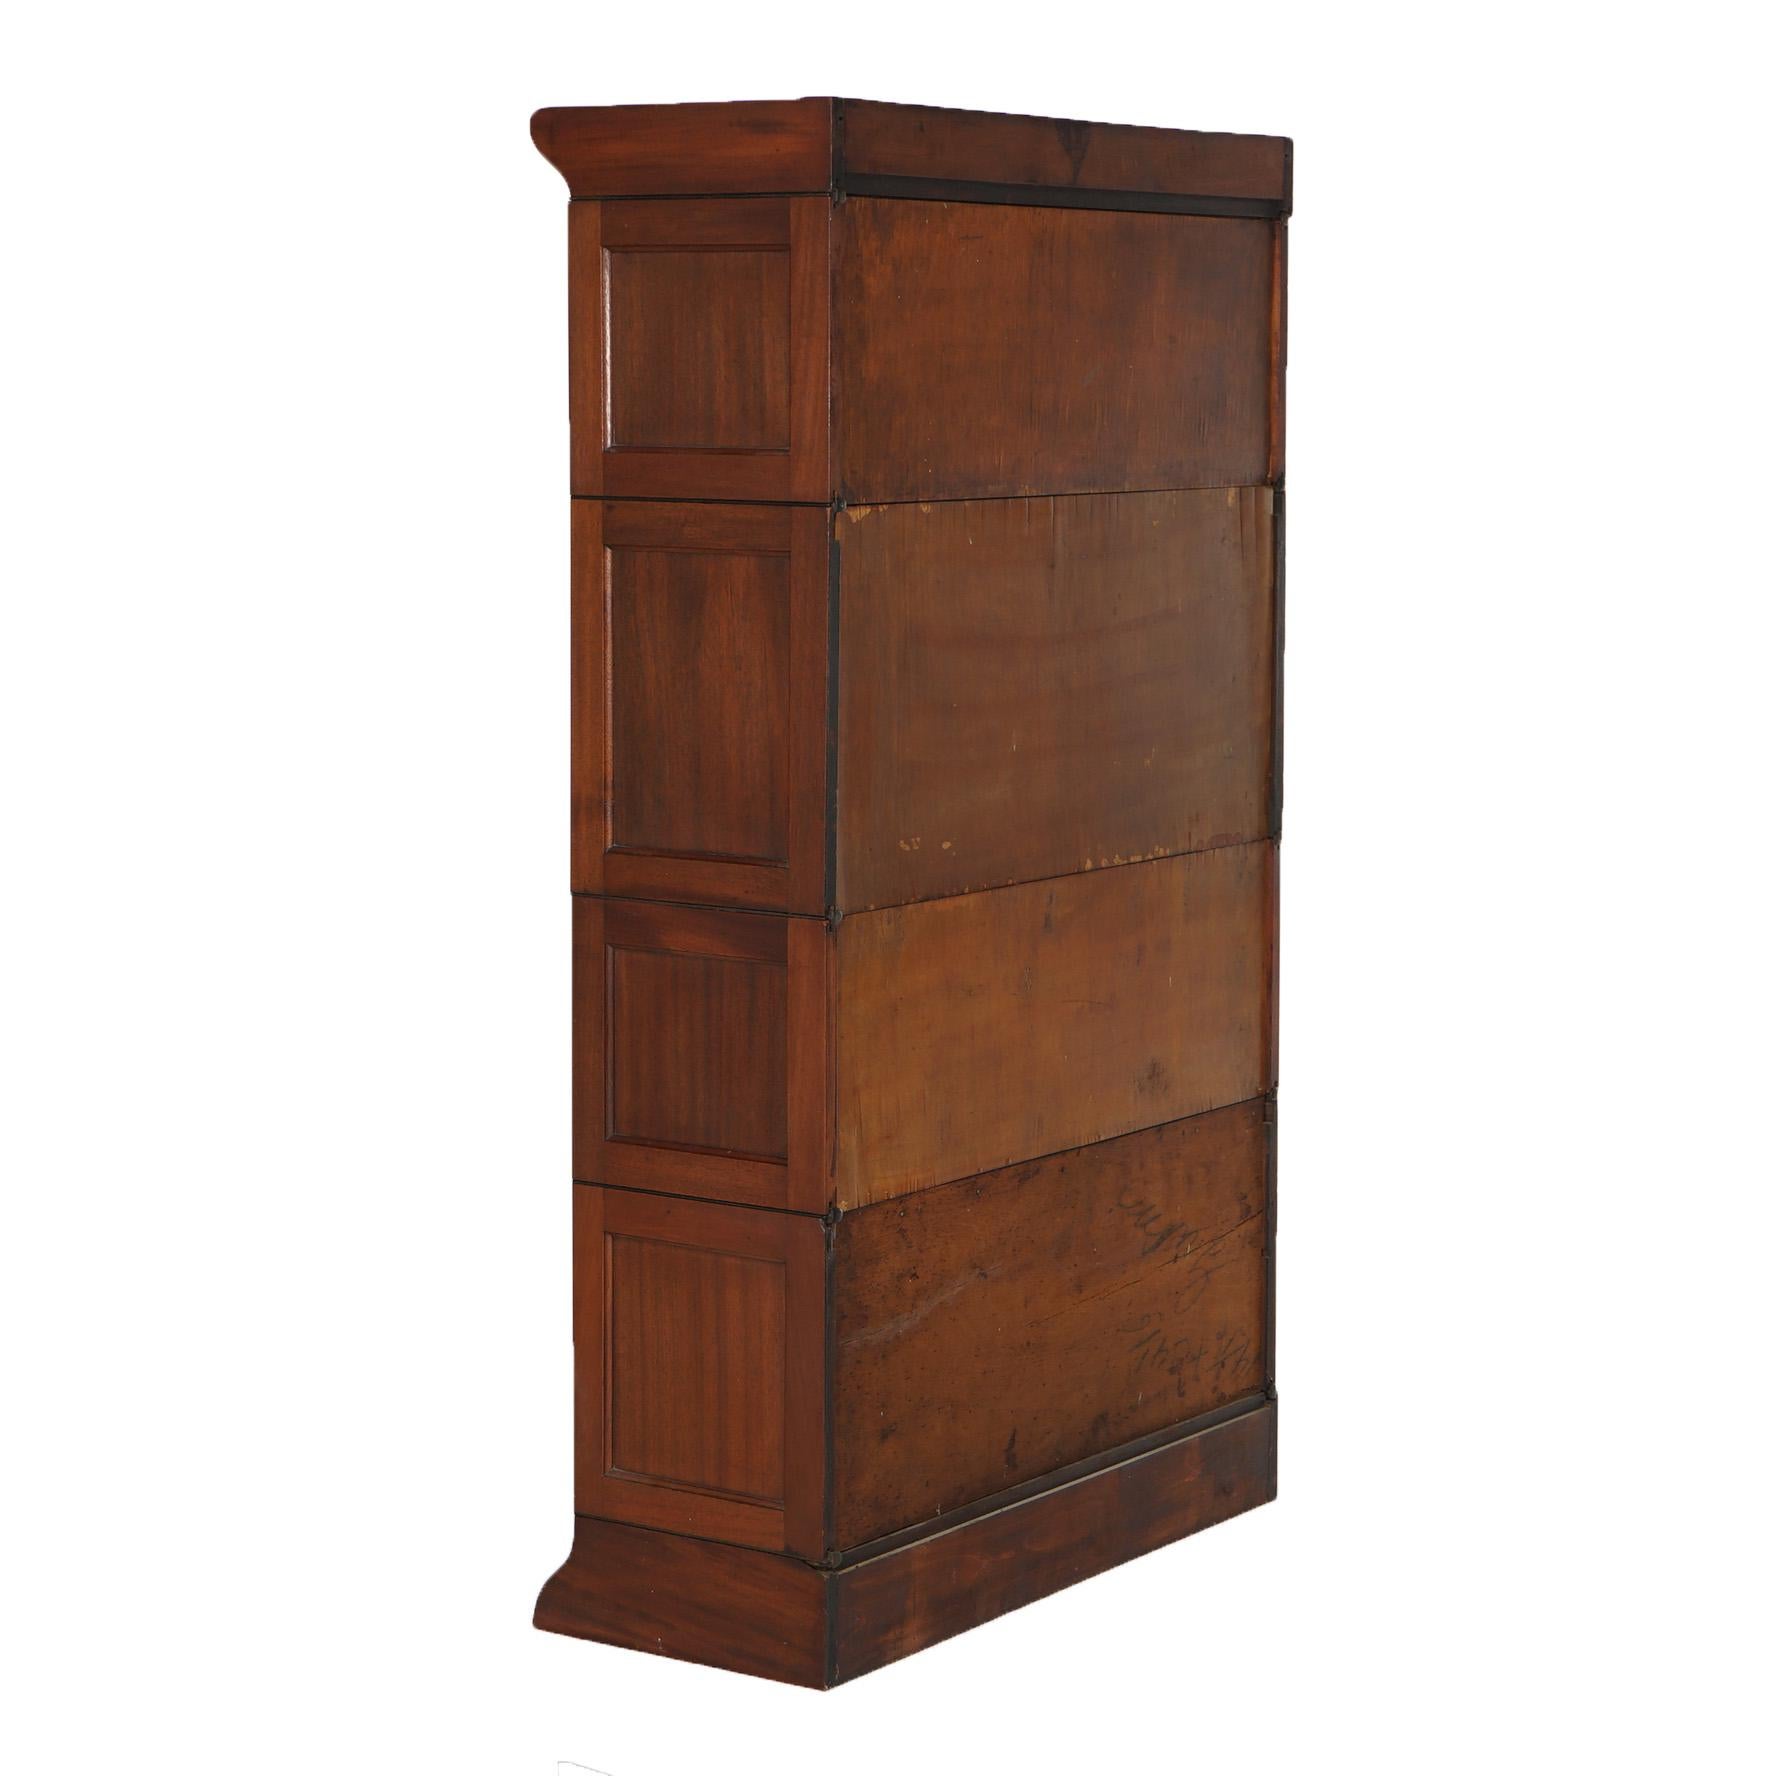 Antique Arts & Crafts Gunn Mahogany & Leaded Glass Barrister Bookcase Secretary For Sale 4